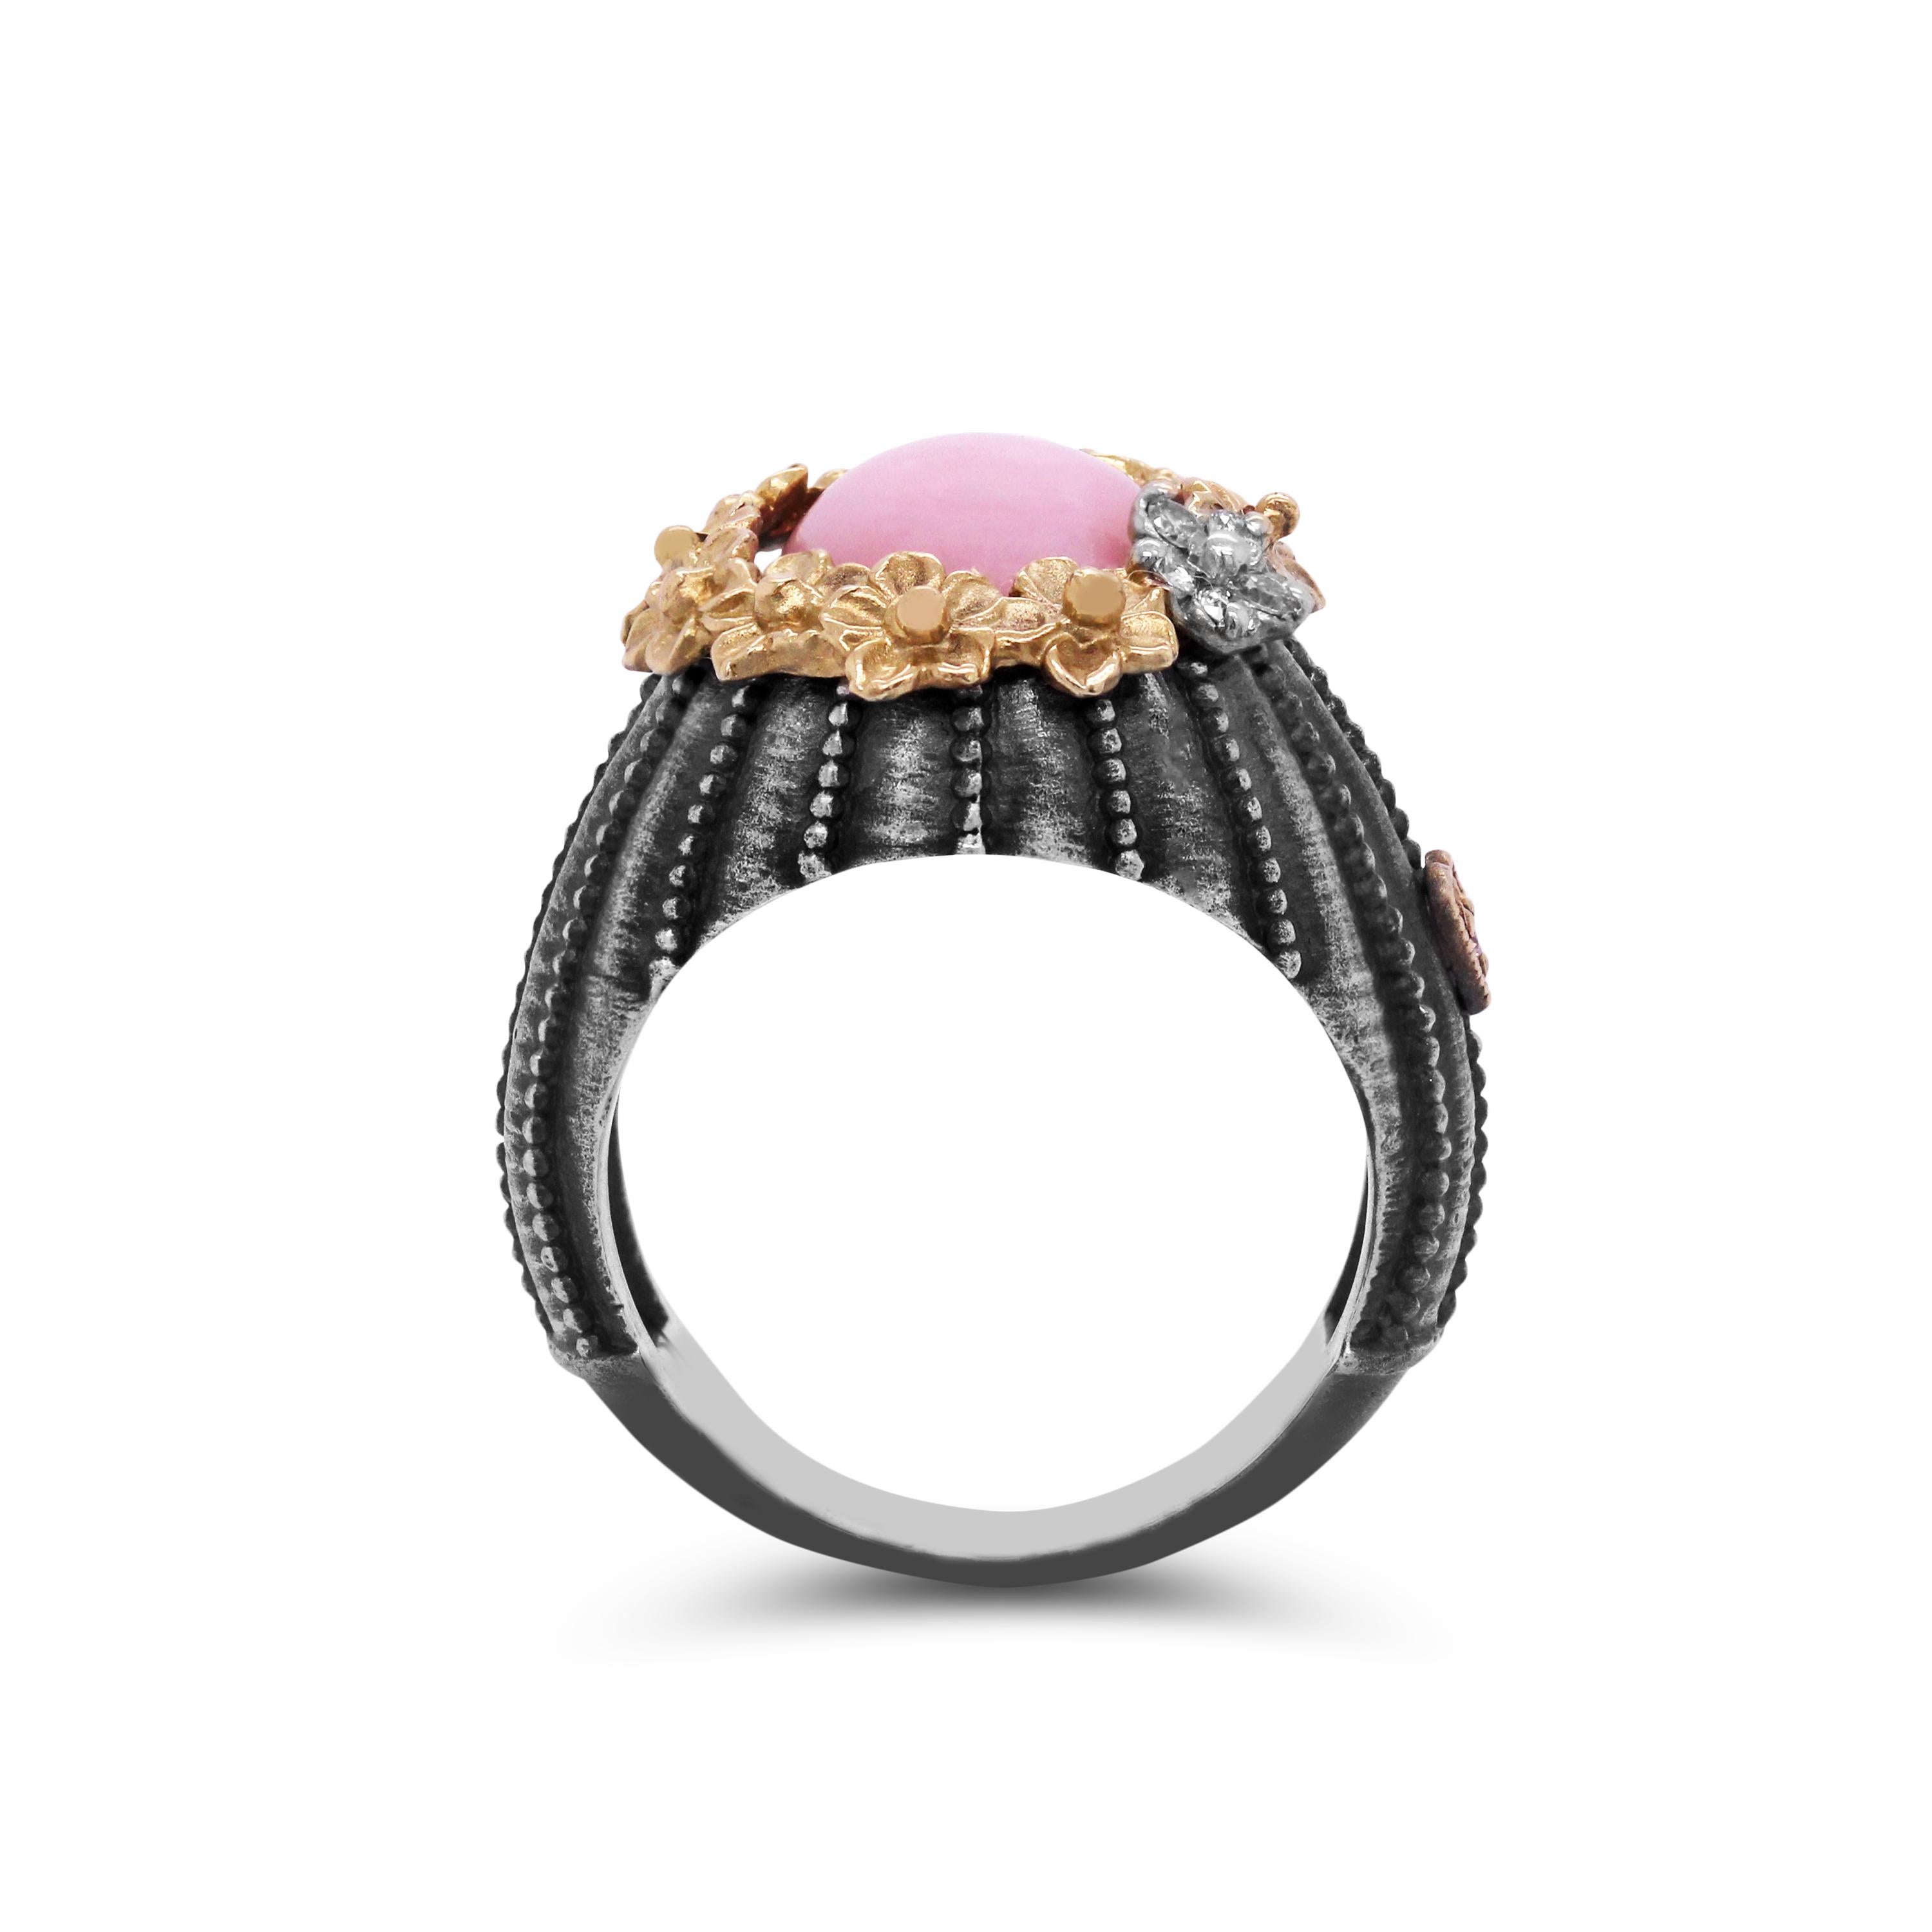 Aged Sterling Silver & 18K Gold Floral Ring with Pink Peruvian Opal center and Diamonds by Stambolian

This ring from the Stambolian 